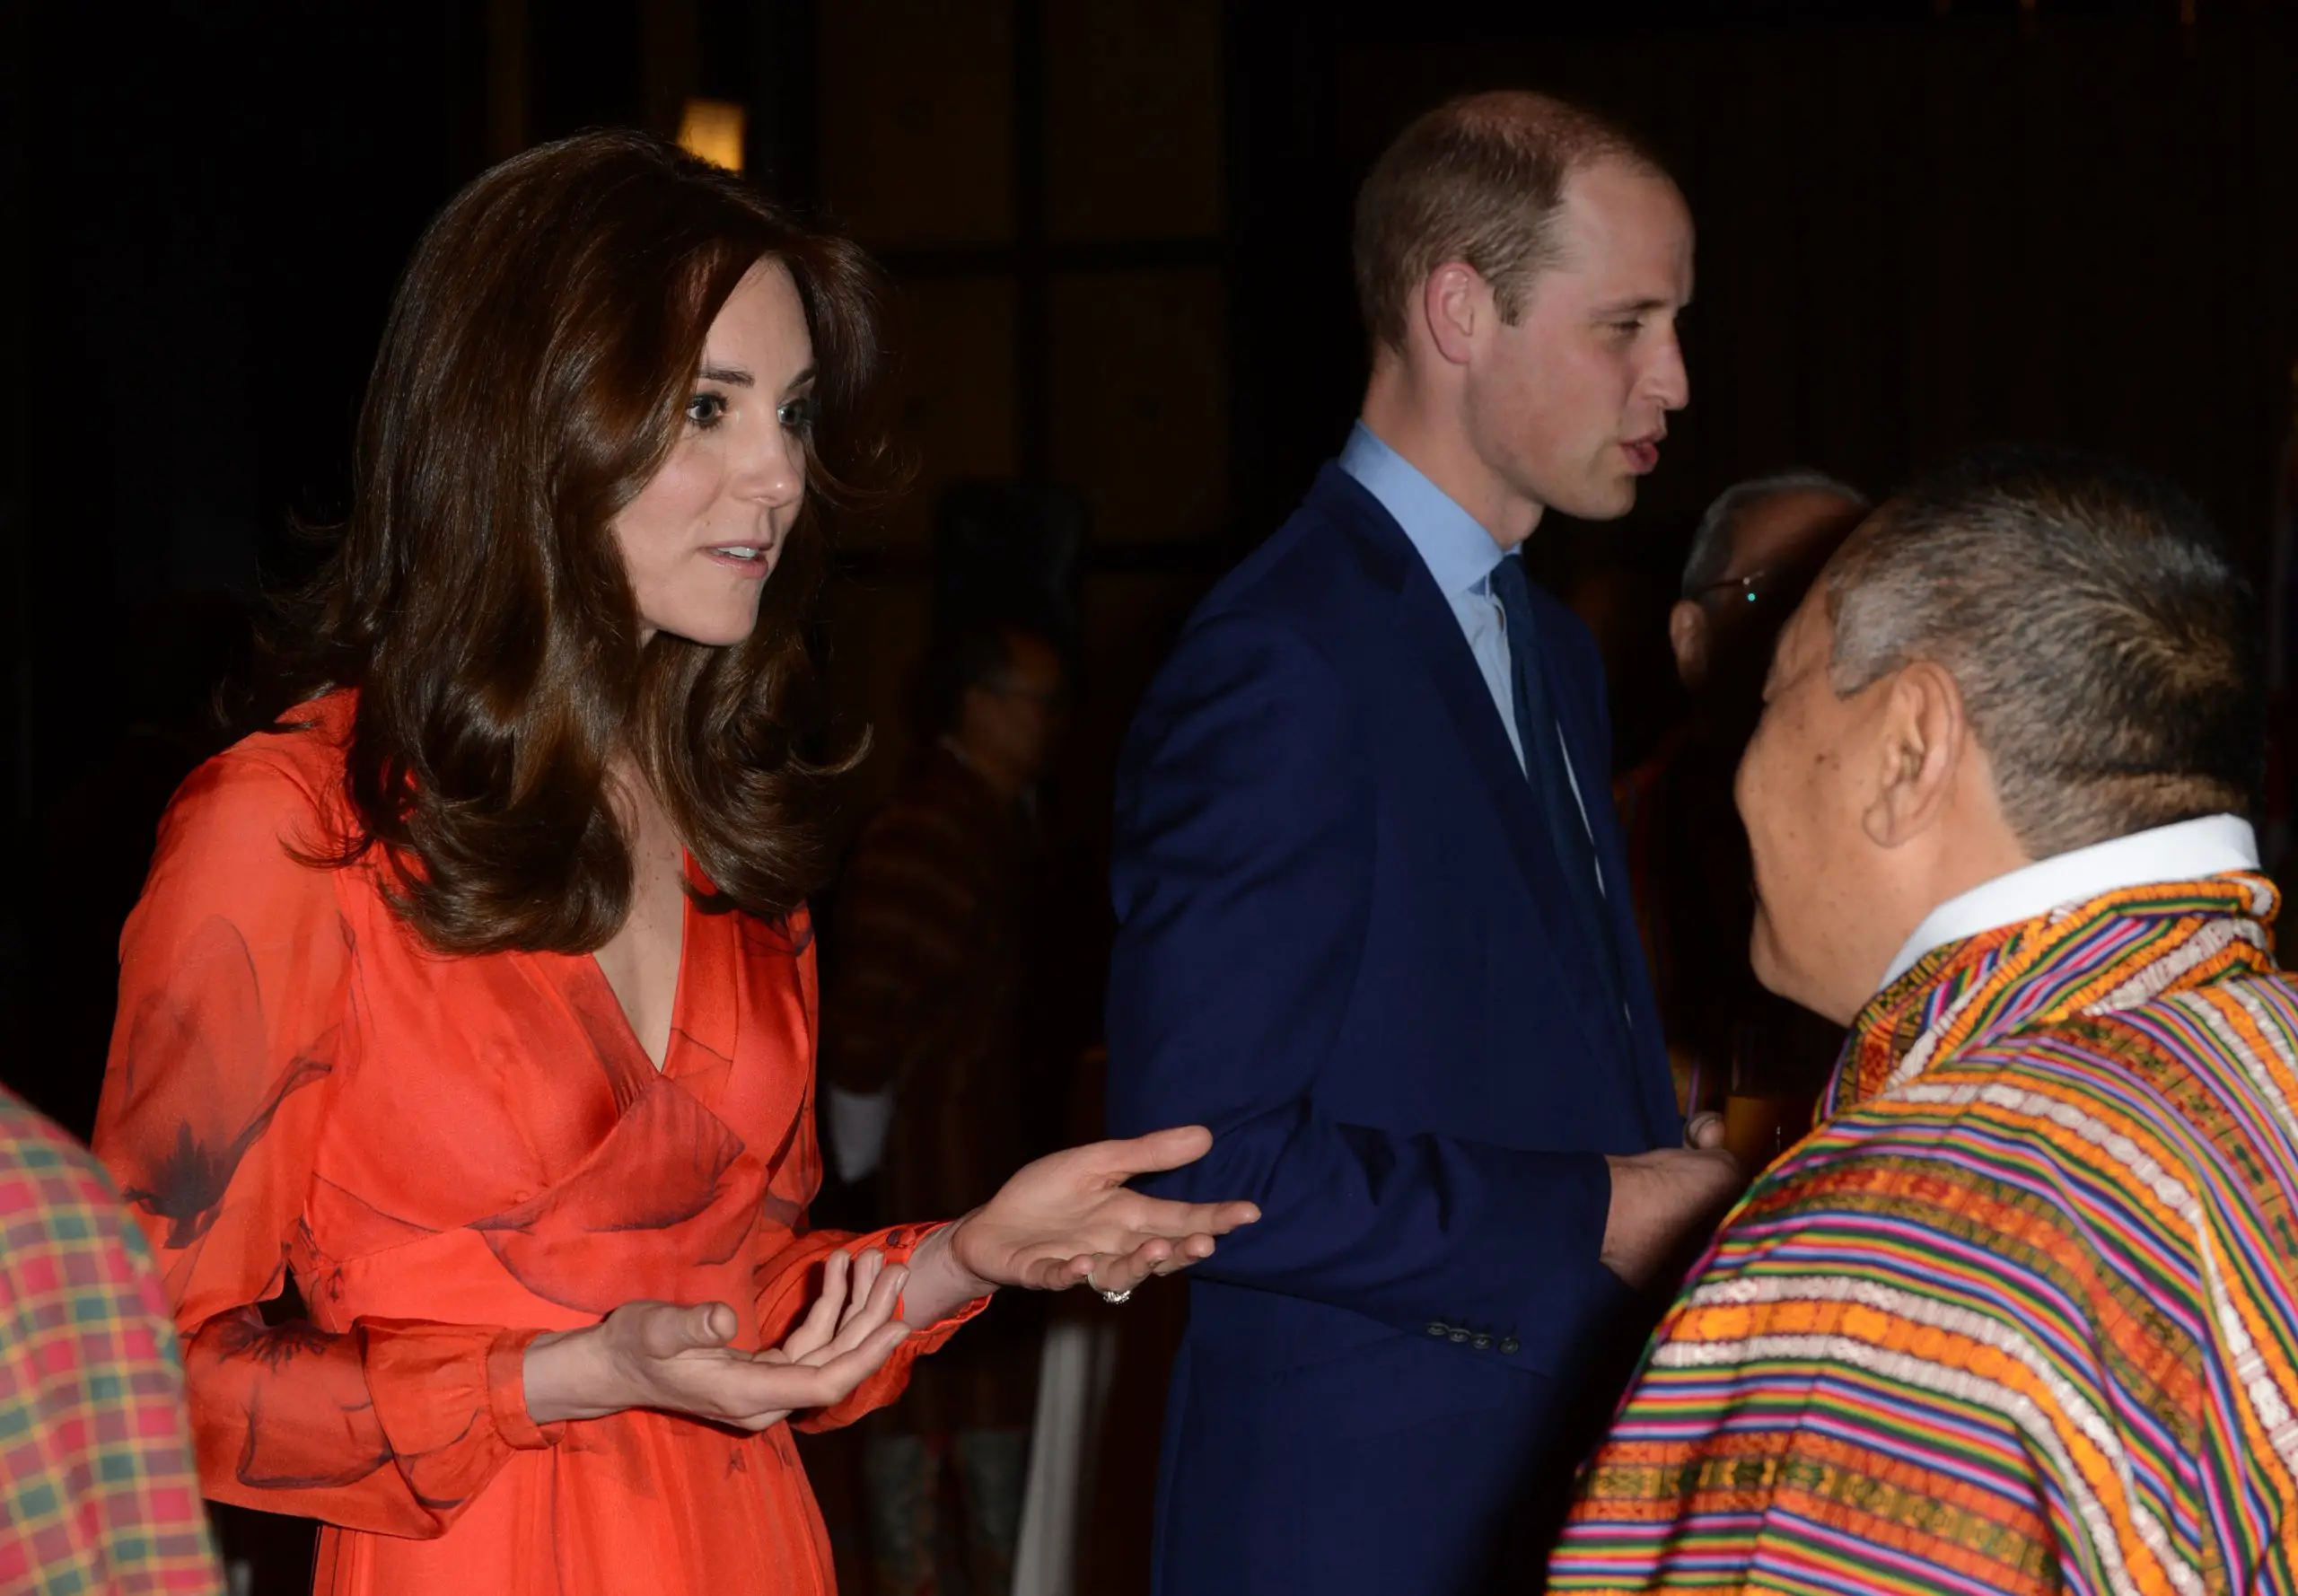 The Duke and Duchess of Cambridge attended a reception in Bhutan during the tour in April